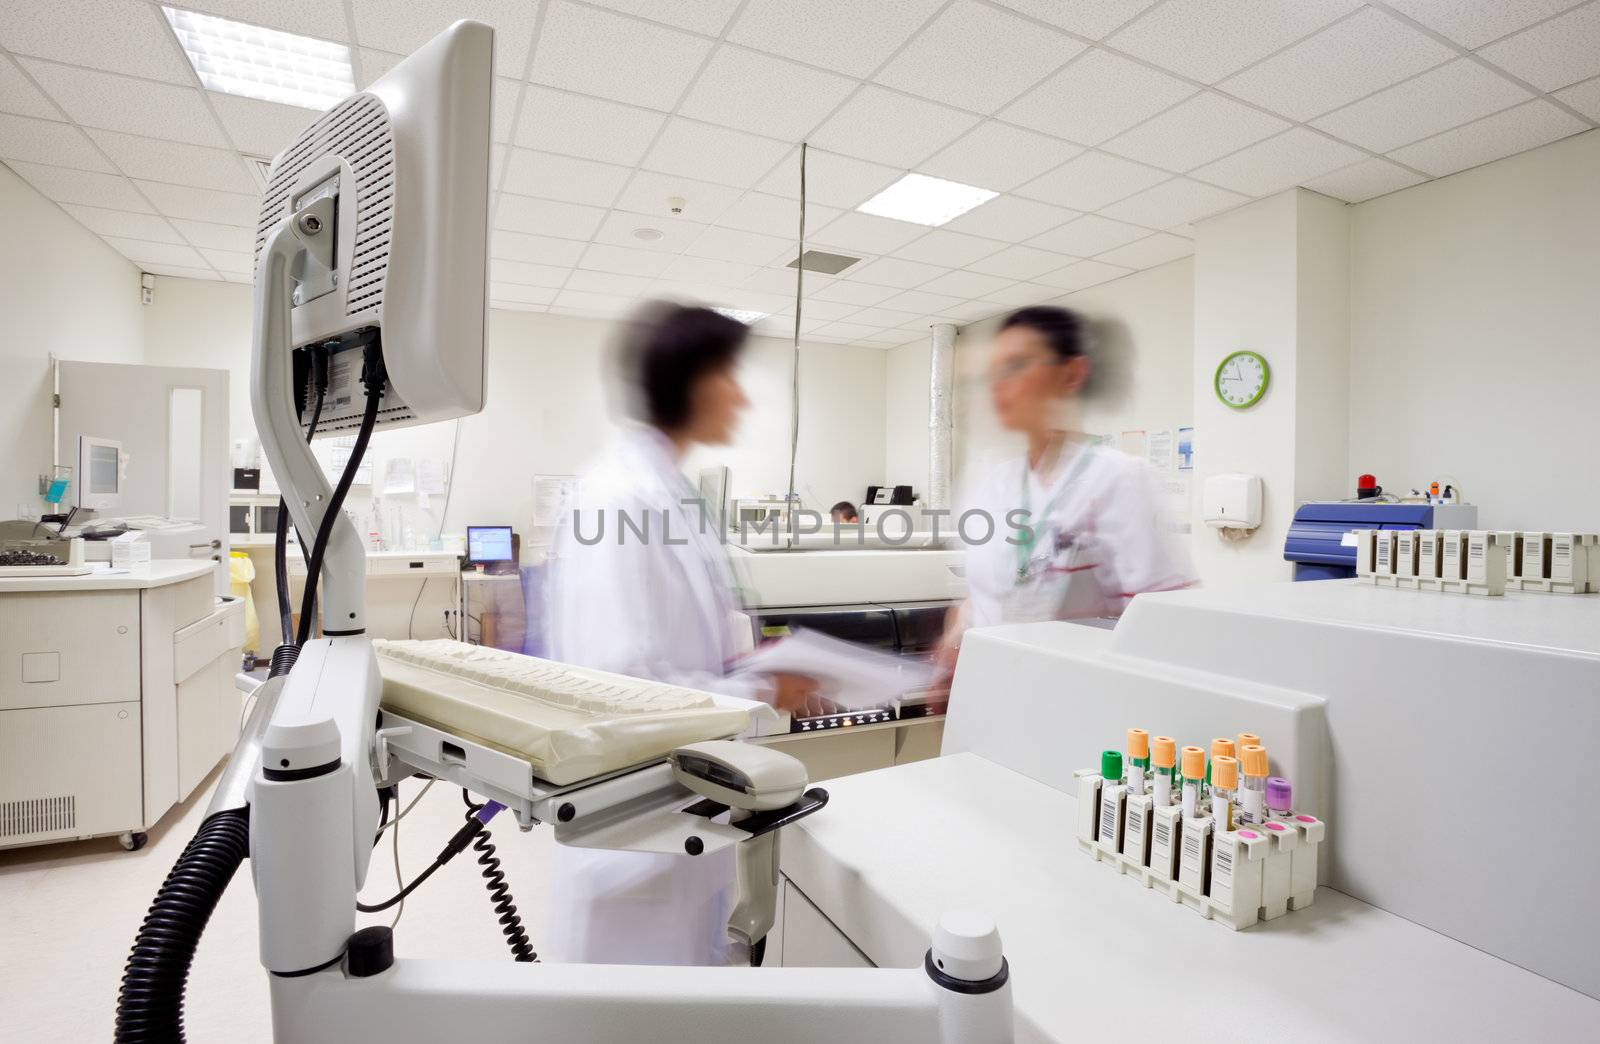 Blurred figures of two laborants with medical uniforms in modern clinical laboratory